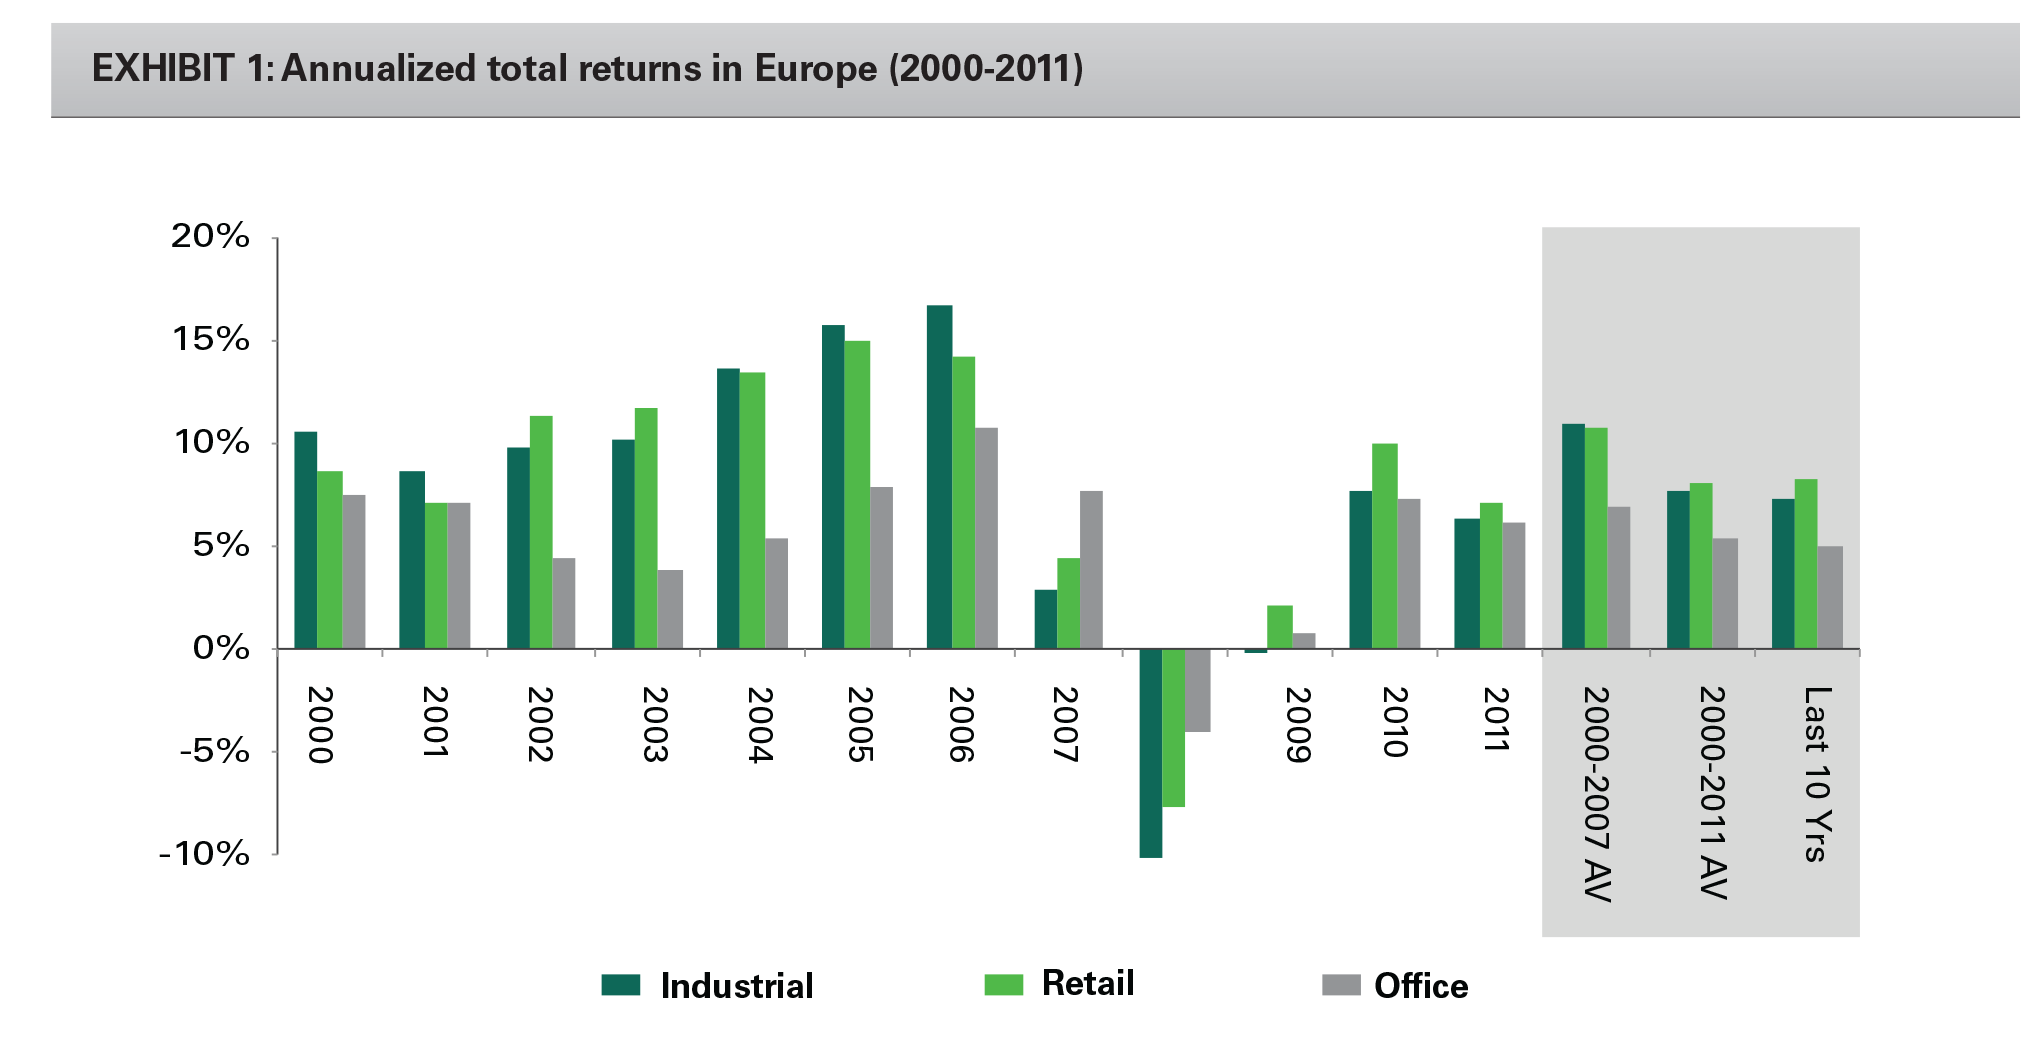 EXHIBIT 1: Annualized total returns in Europe (2000-2011)